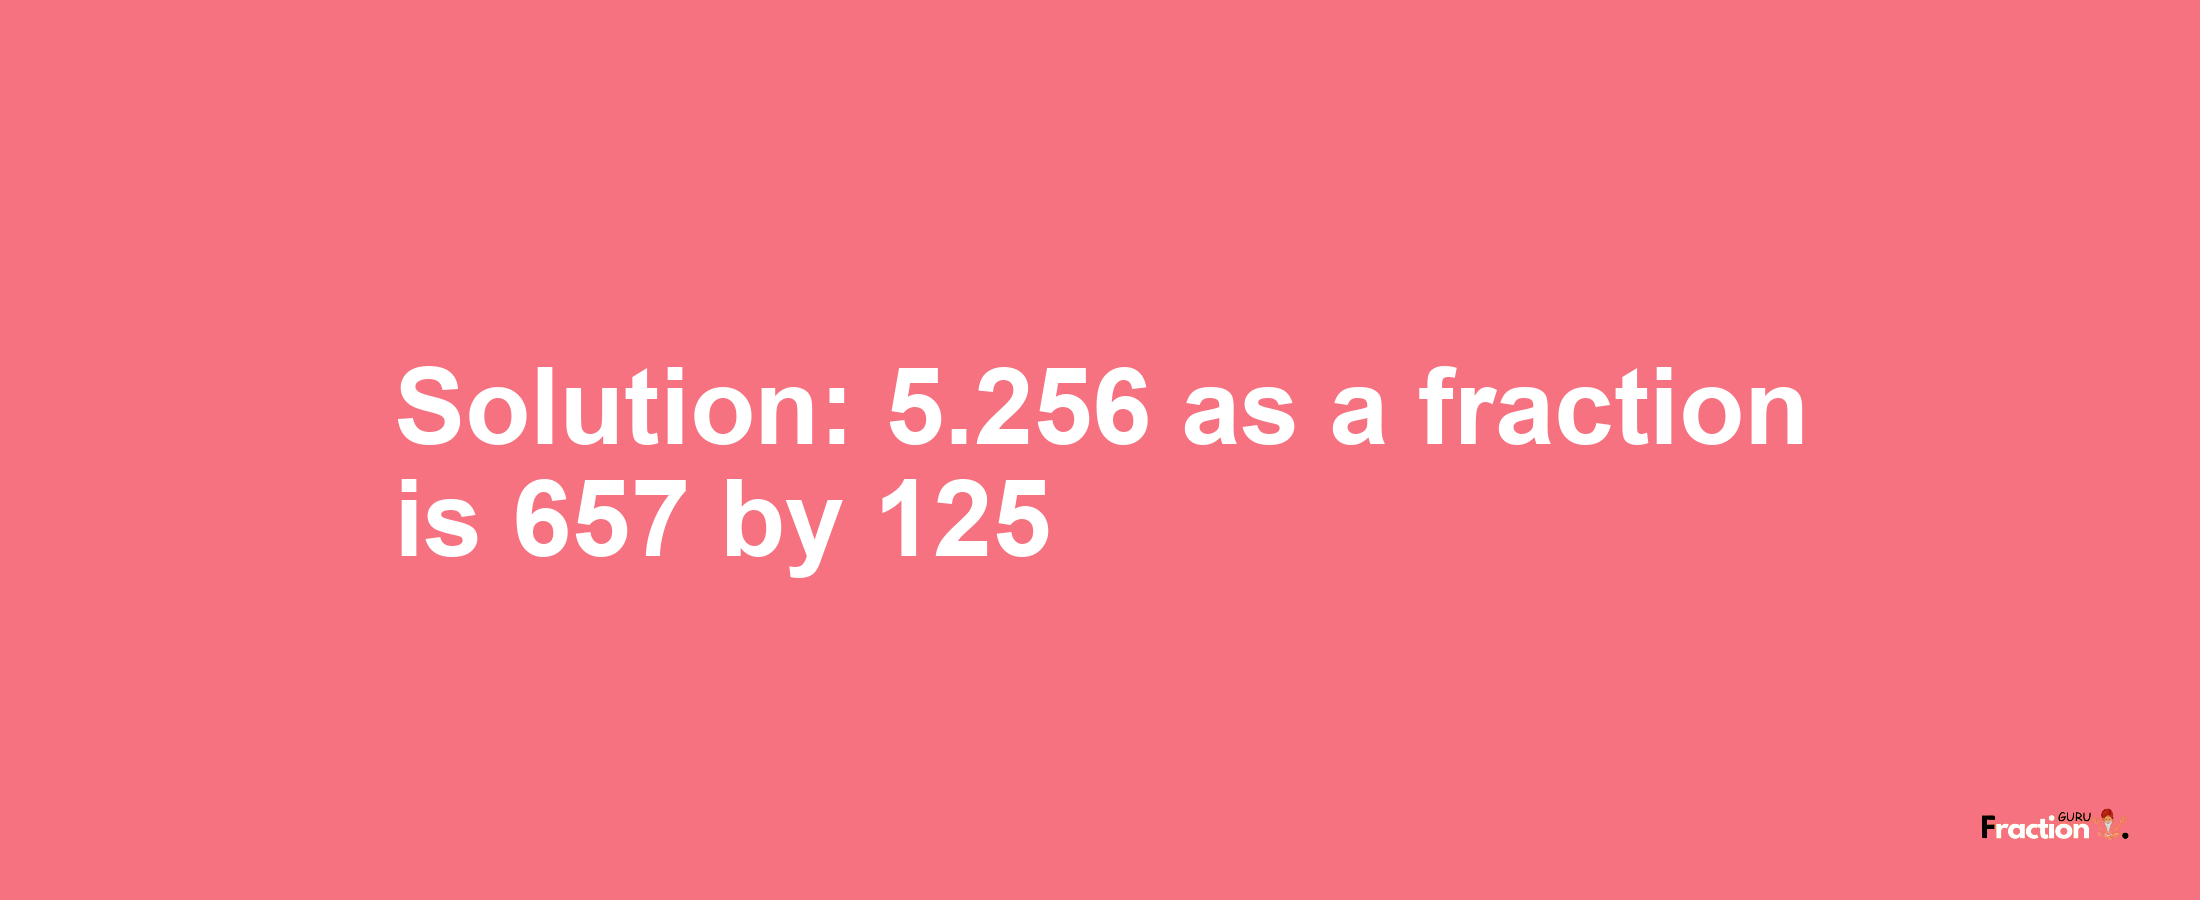 Solution:5.256 as a fraction is 657/125